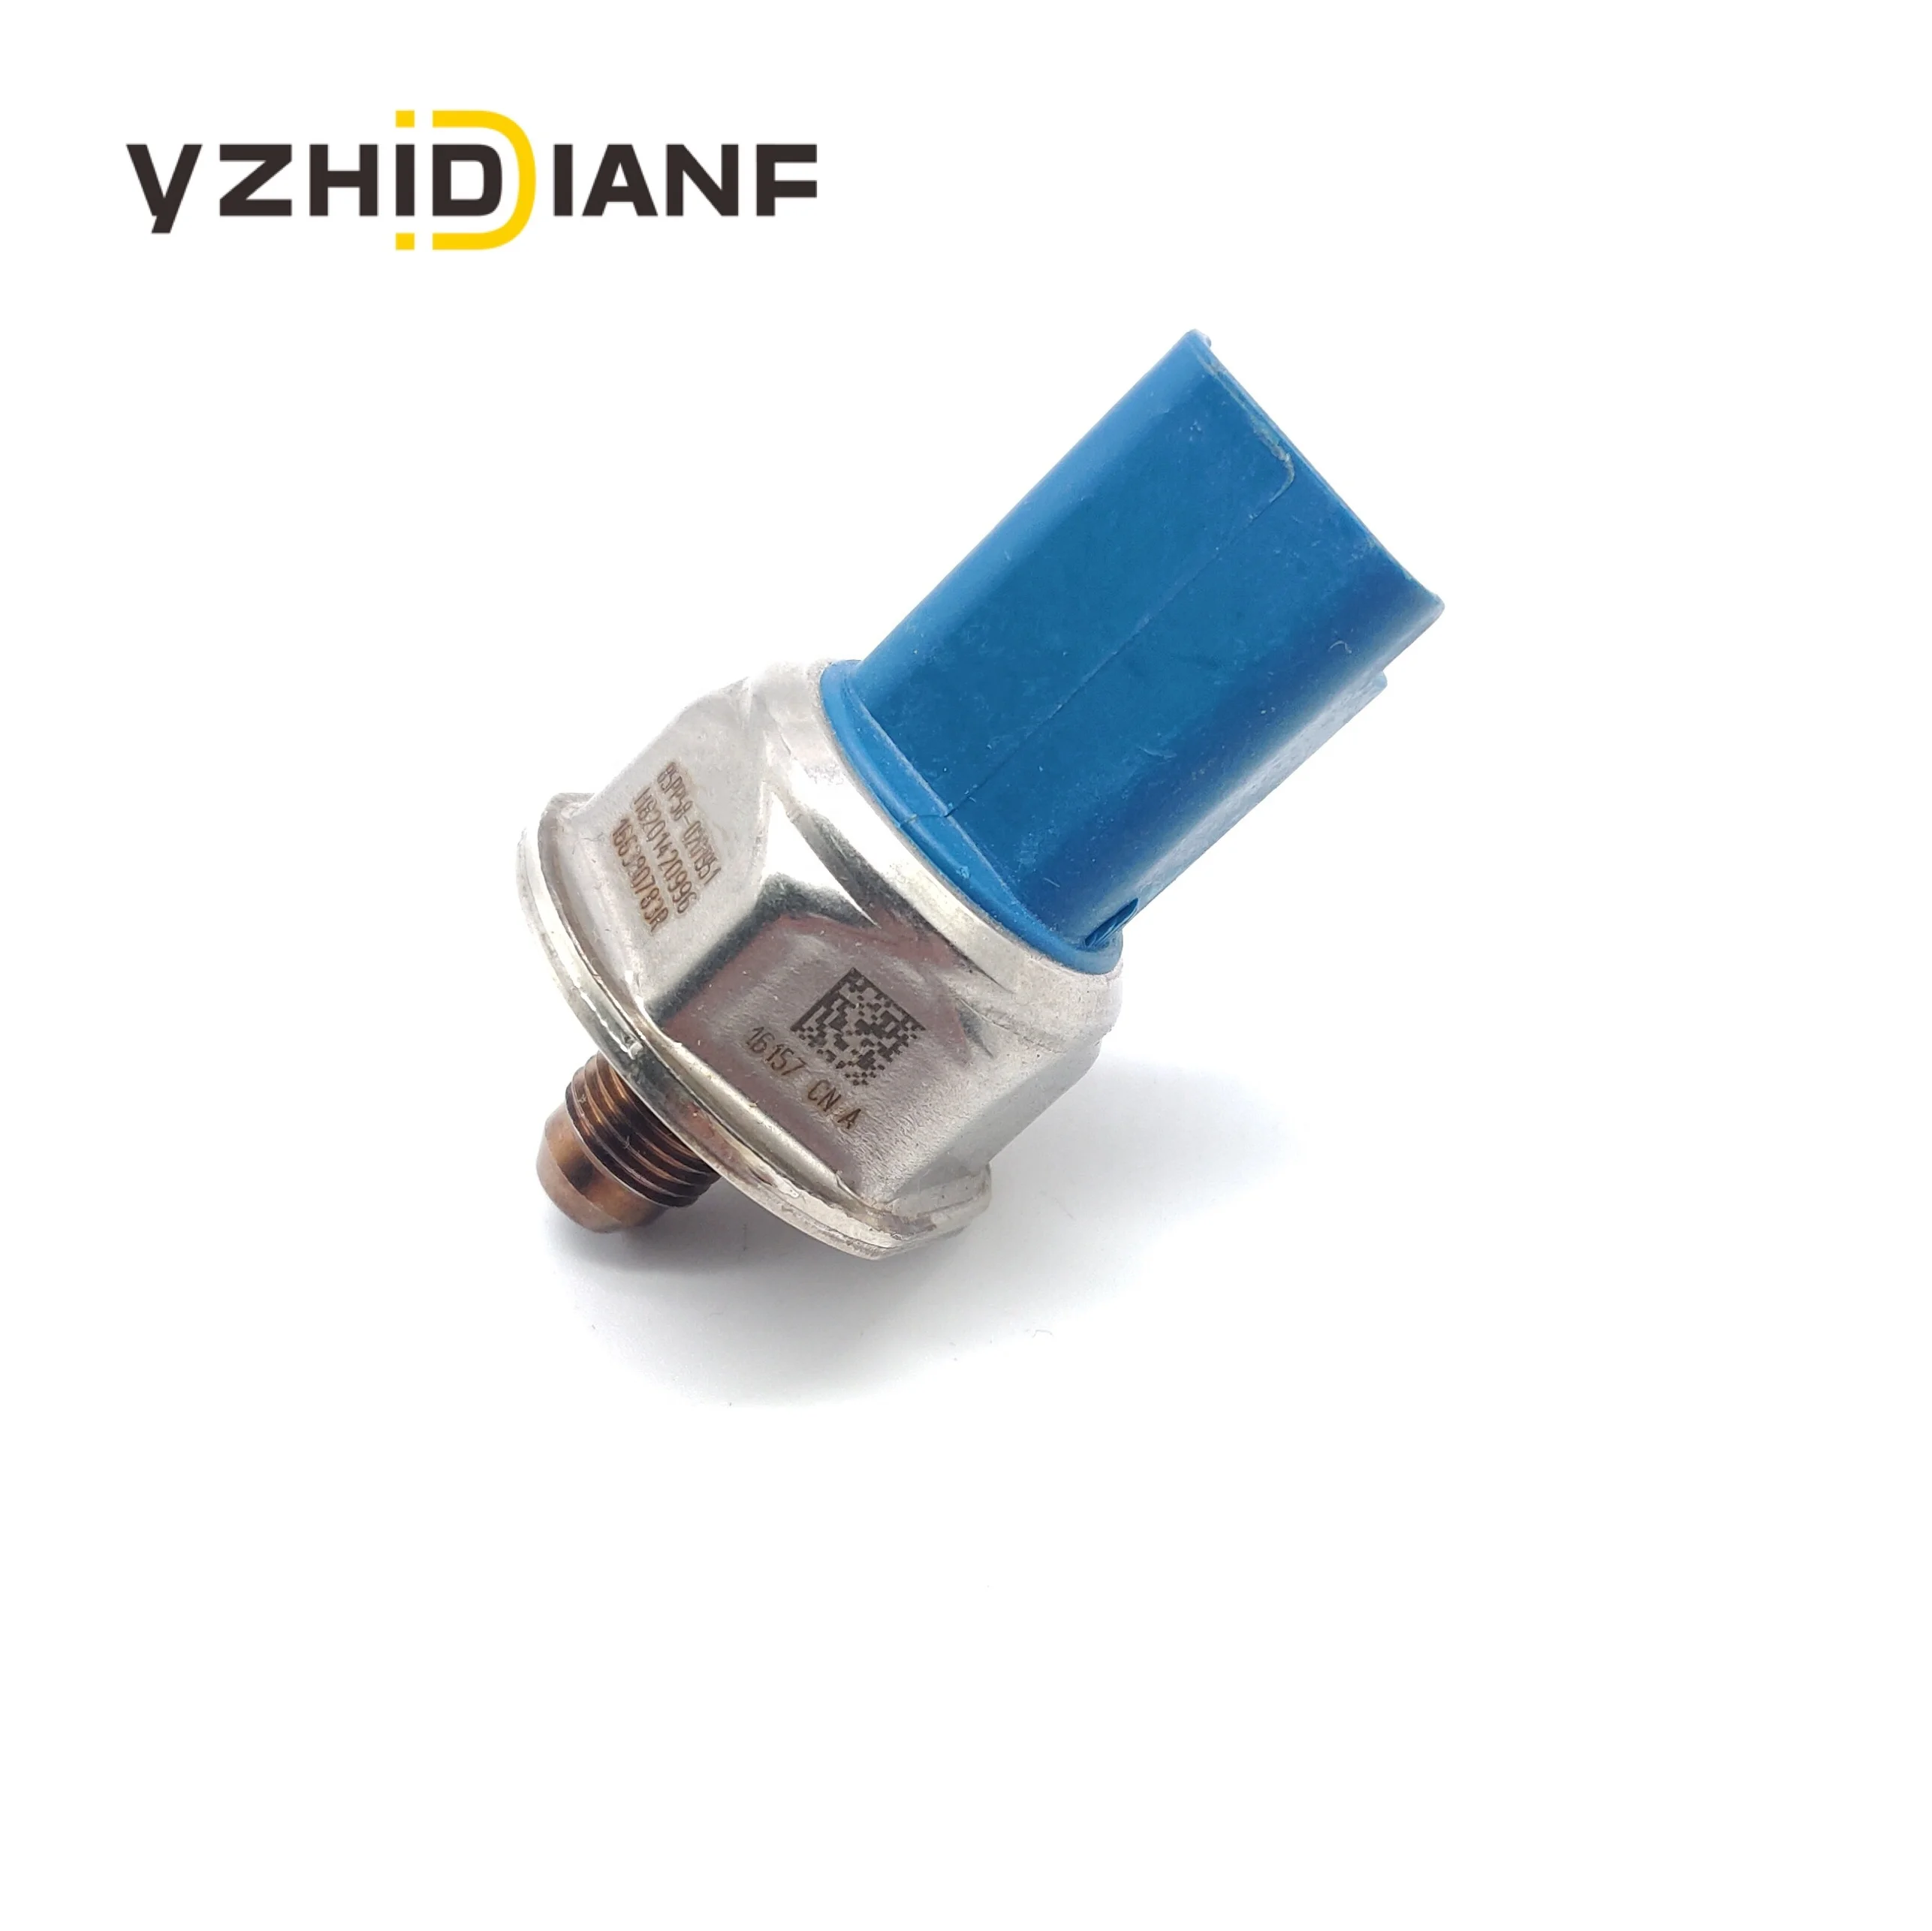 Source 85pp58-02 166380783R for Ni-ssan 1.2T QASHQAI J11 1.2 DIG-T 